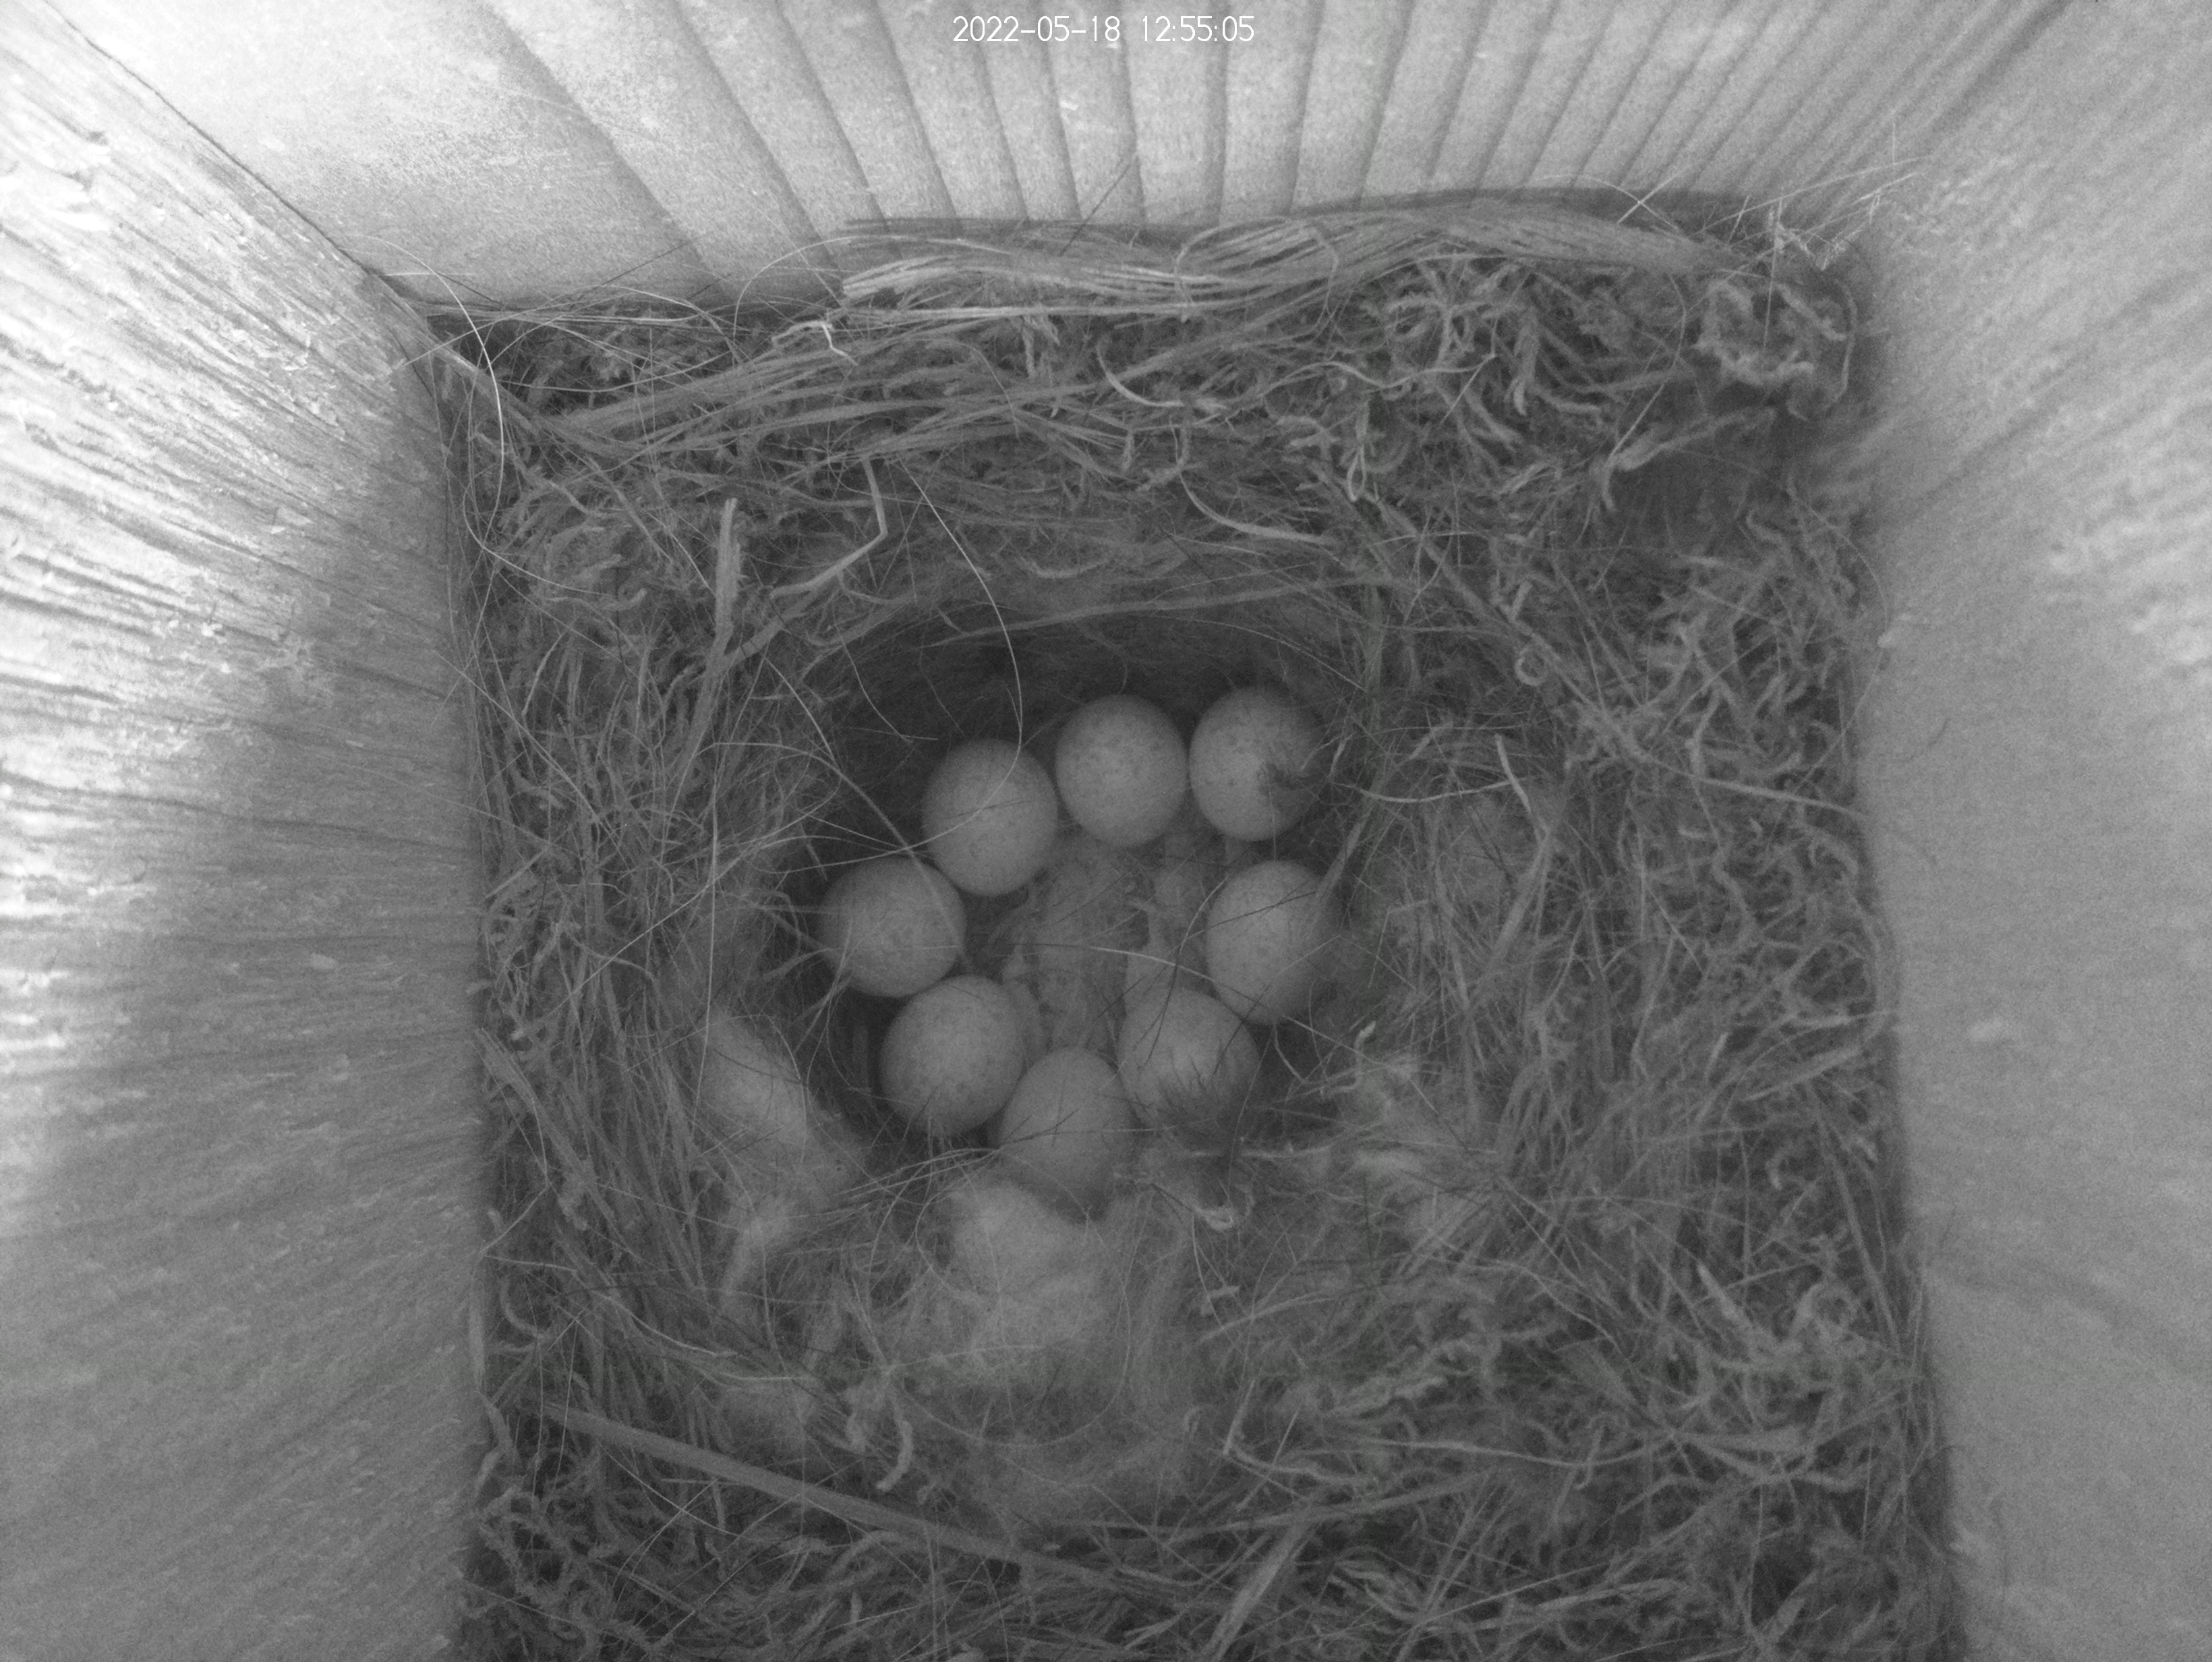 Interior of bird house showing 8 eggs in a nest